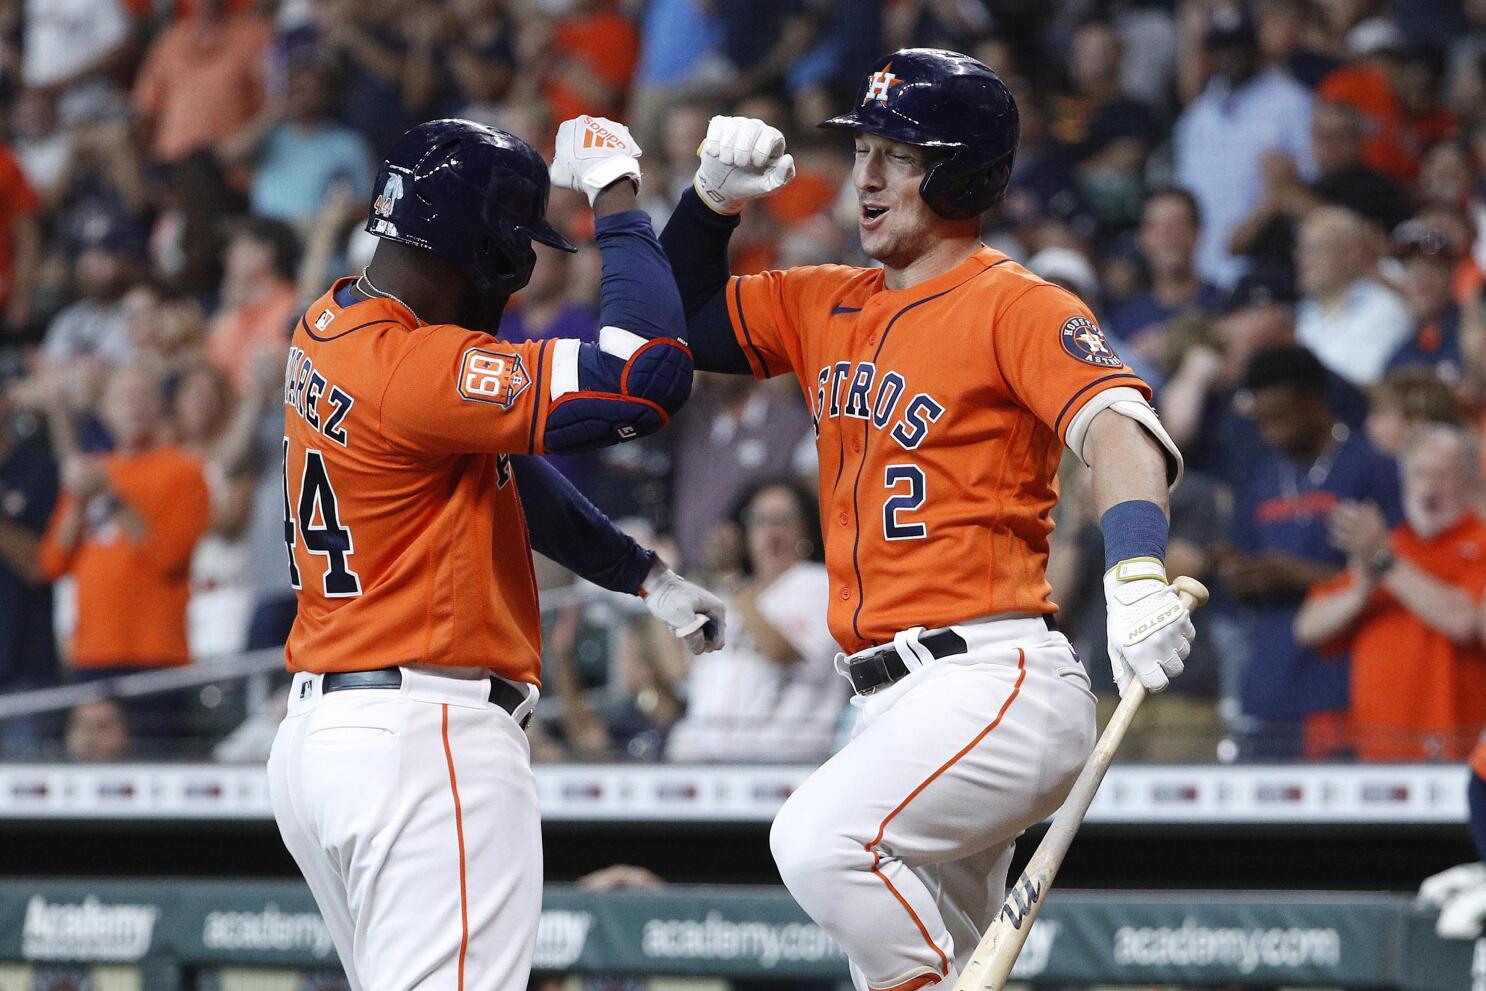 MLB News: Playoff time is Yordan time: Astros' epic comeback clinched with  walk-off HR by Yordan Alvarez vs. Mariners